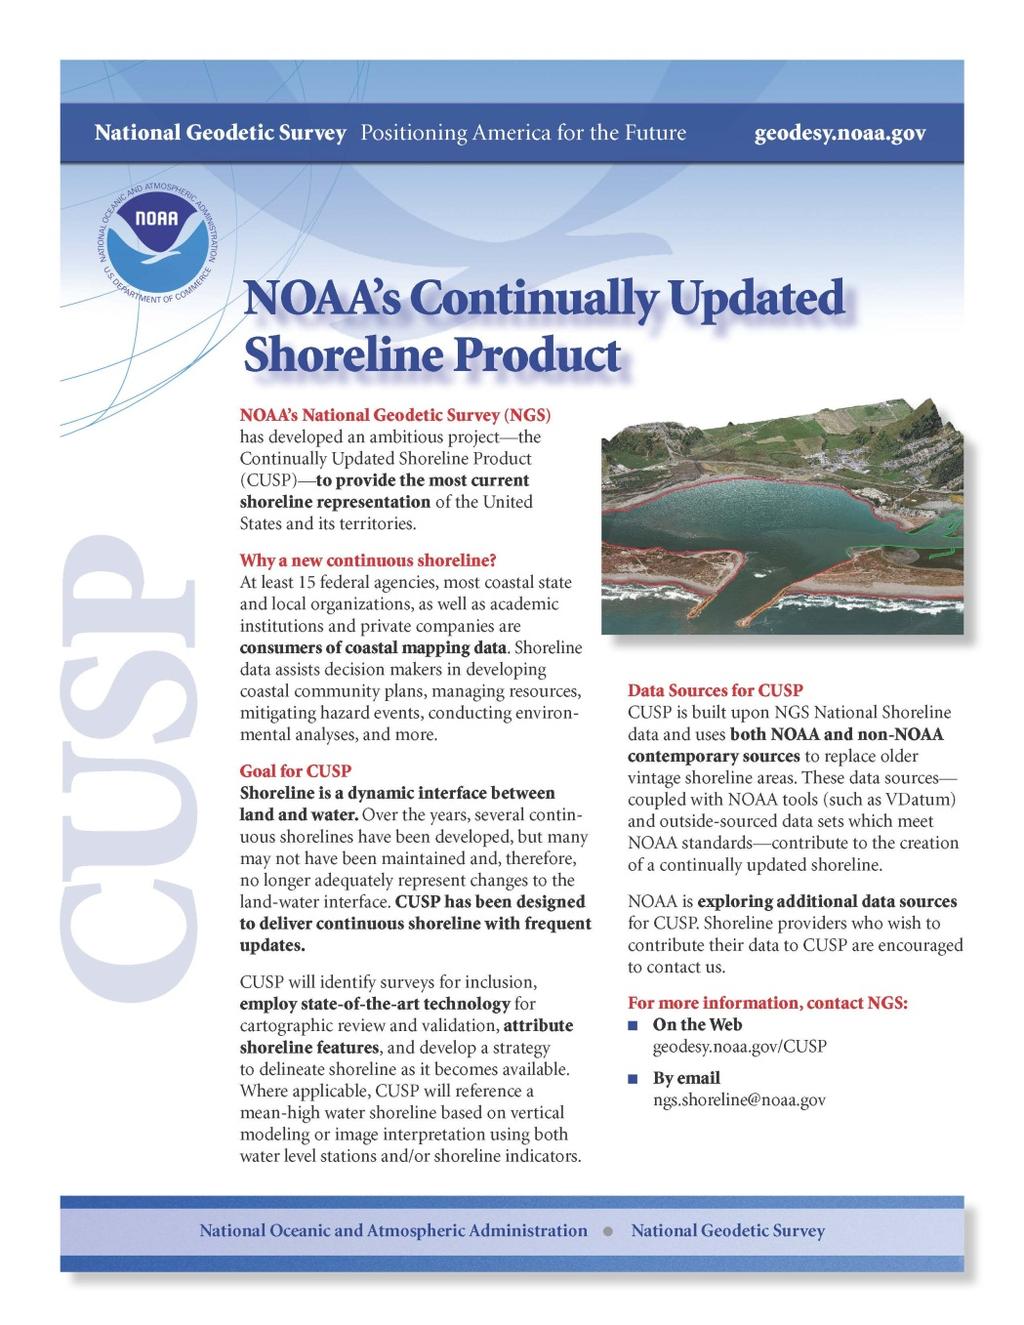 Continually Updated Shoreline Product To provide the most current shoreline representation Designed to deliver continuous shoreline with frequent updates Employ